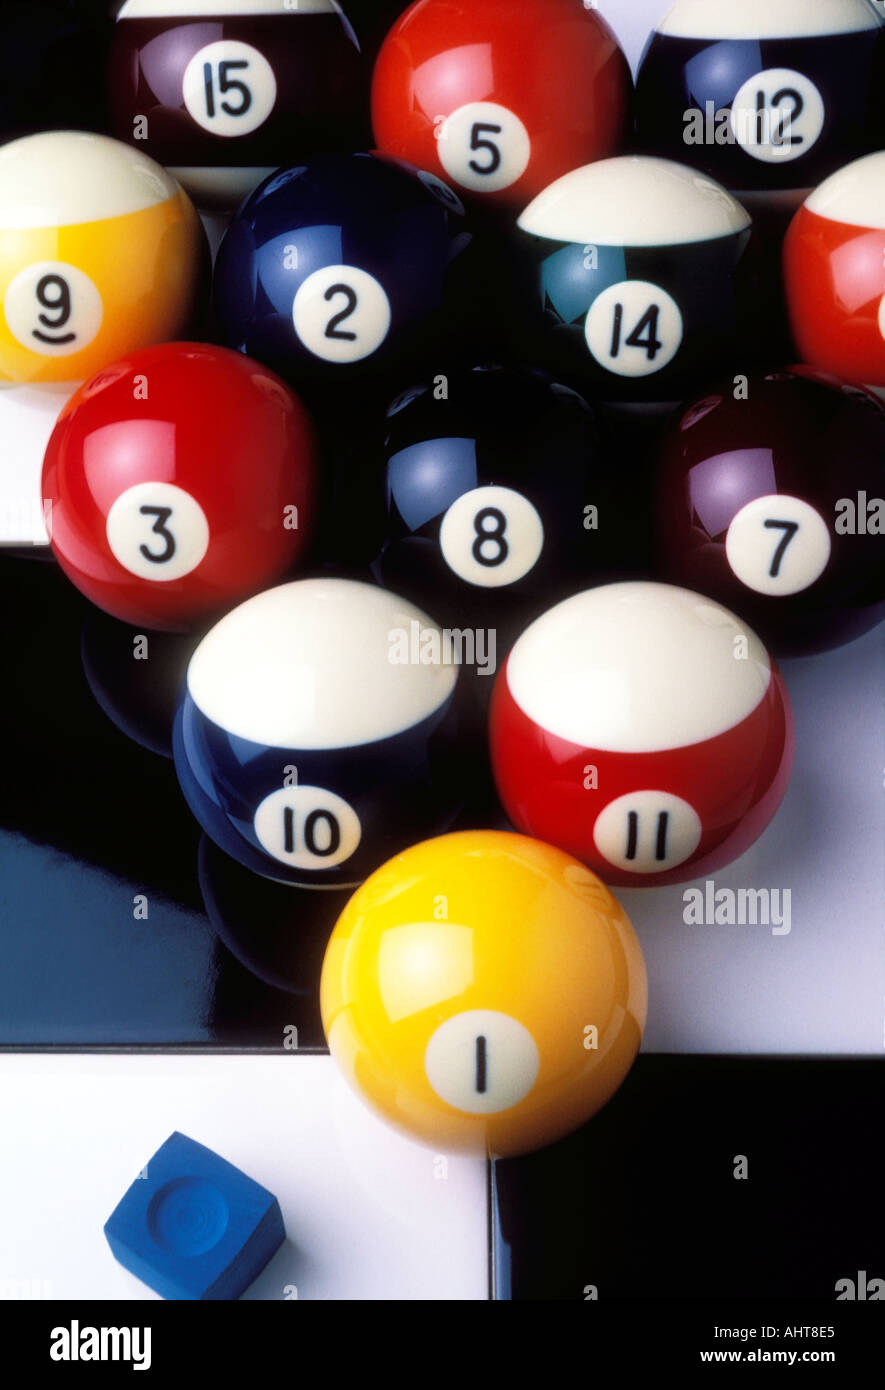 Pool balls stacked up ready for break Stock Photo - Alamy